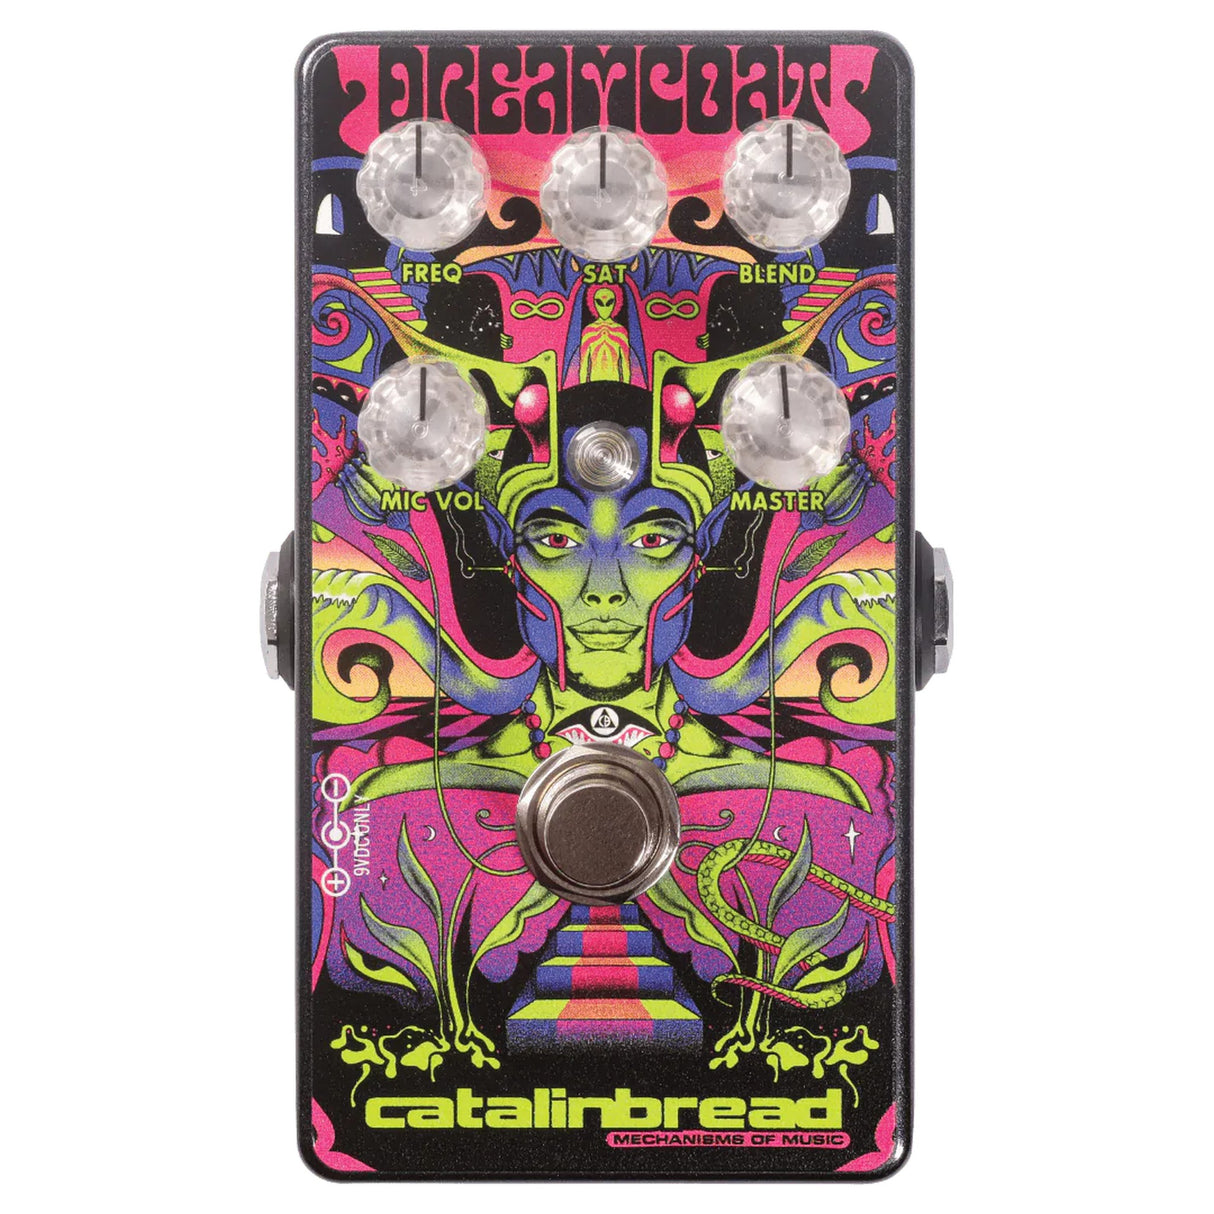 Catalinbread Dreamcoat Akai Preamp Guitar Effects Pedal